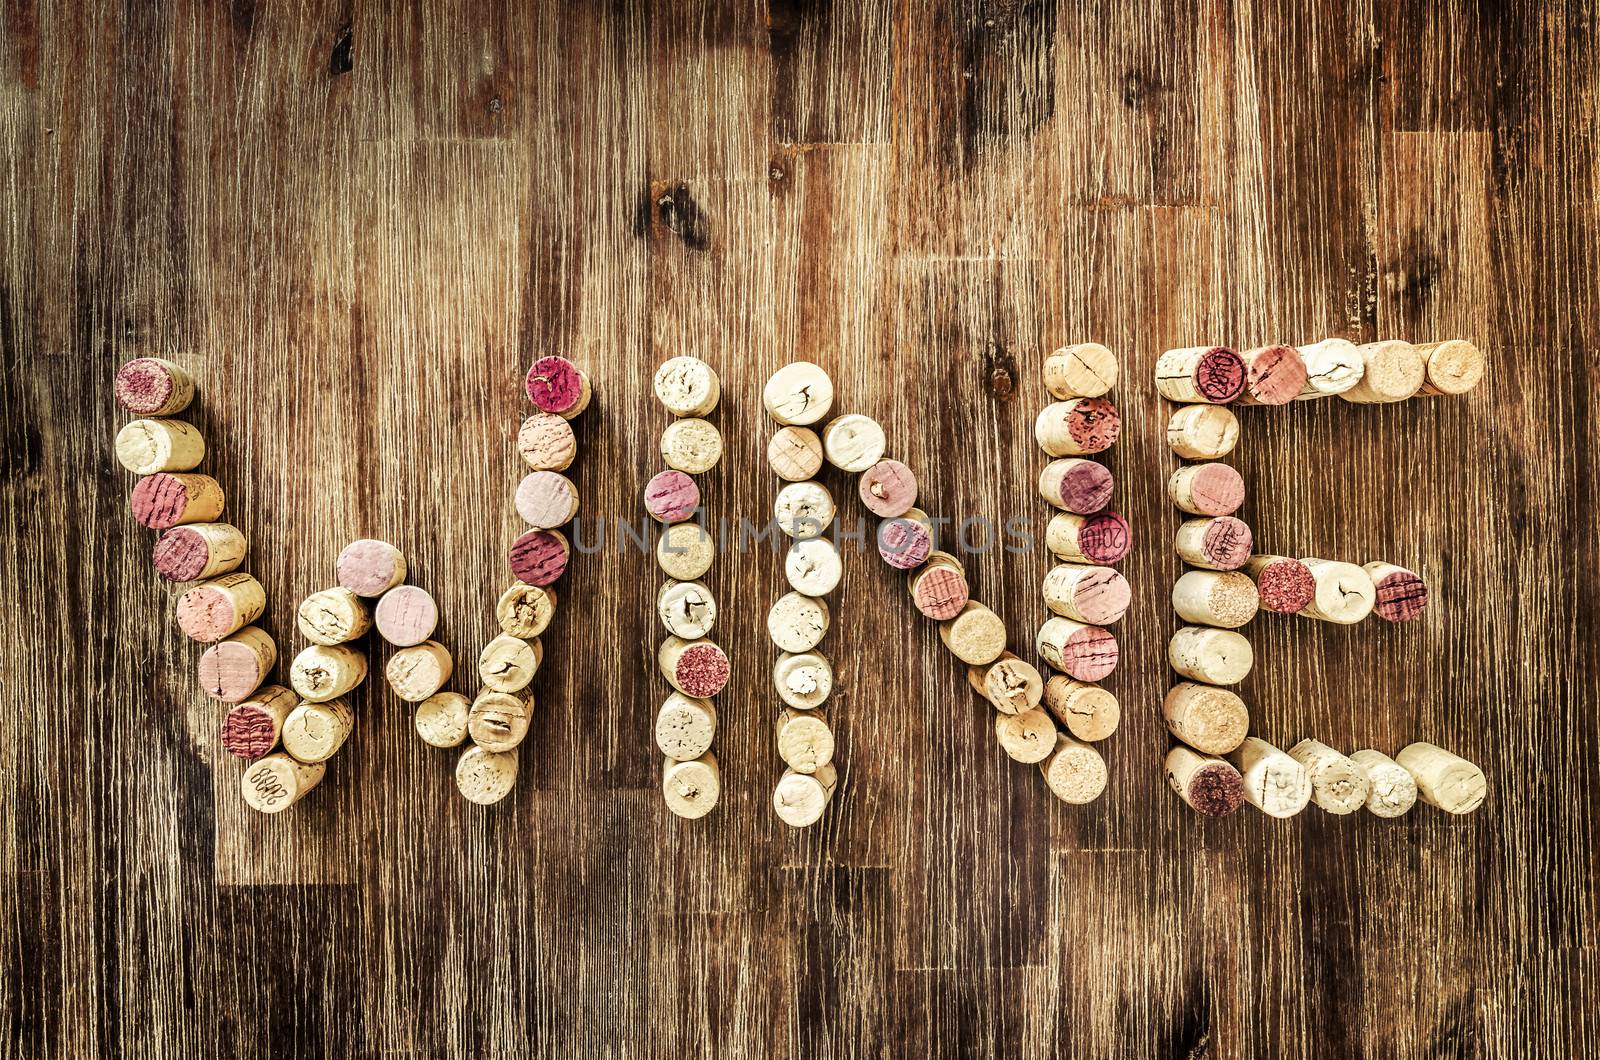 Sign wine made from corks on wooden vintage table by martinm303